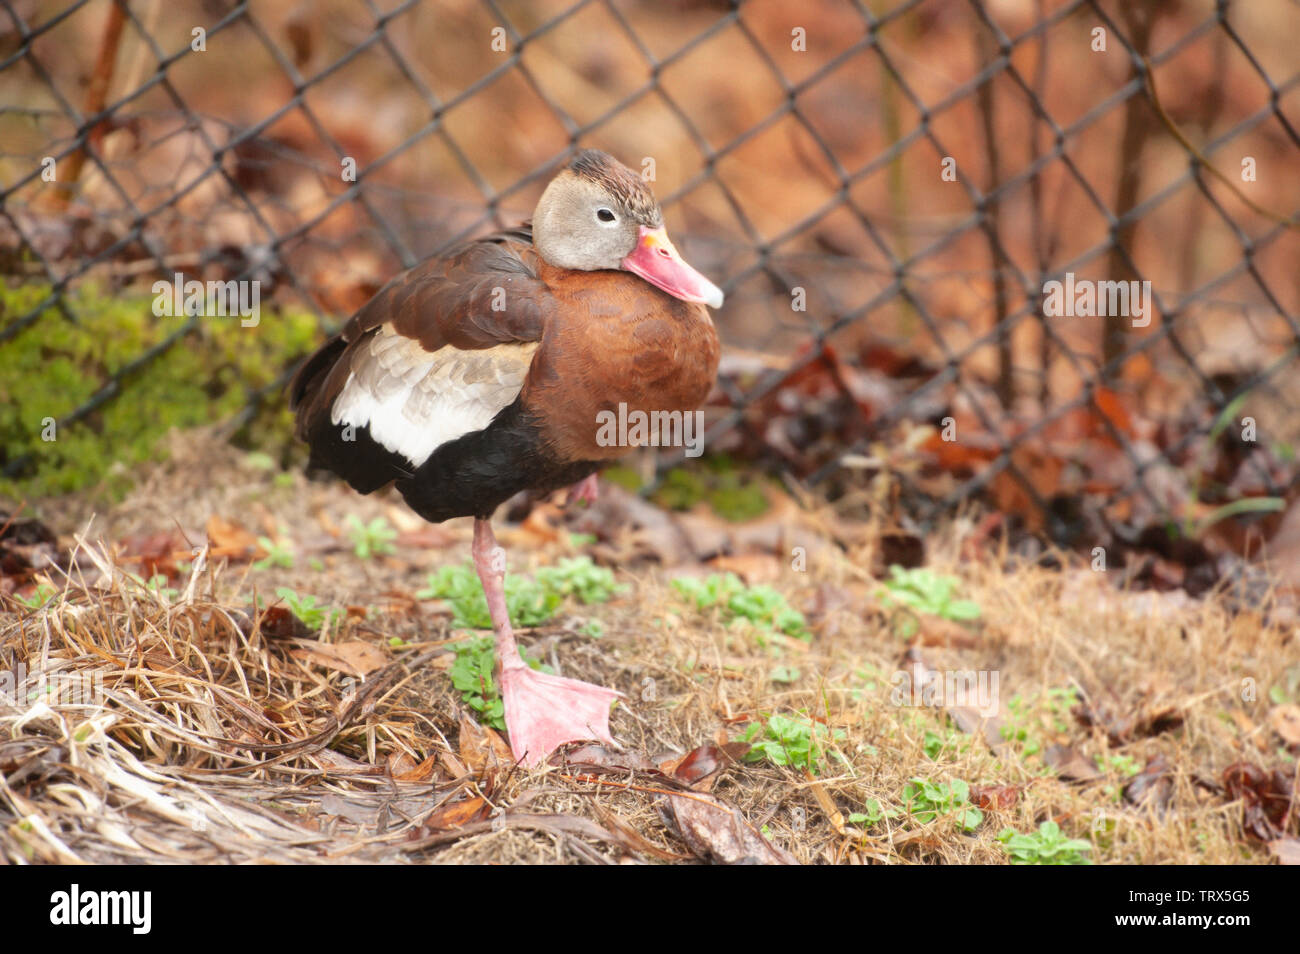 Black-bellied Whistling Duck (Dendrocygna autumnalis) stands on one leg on a wooden railing at a bird park. This is an adult duck. Stock Photo